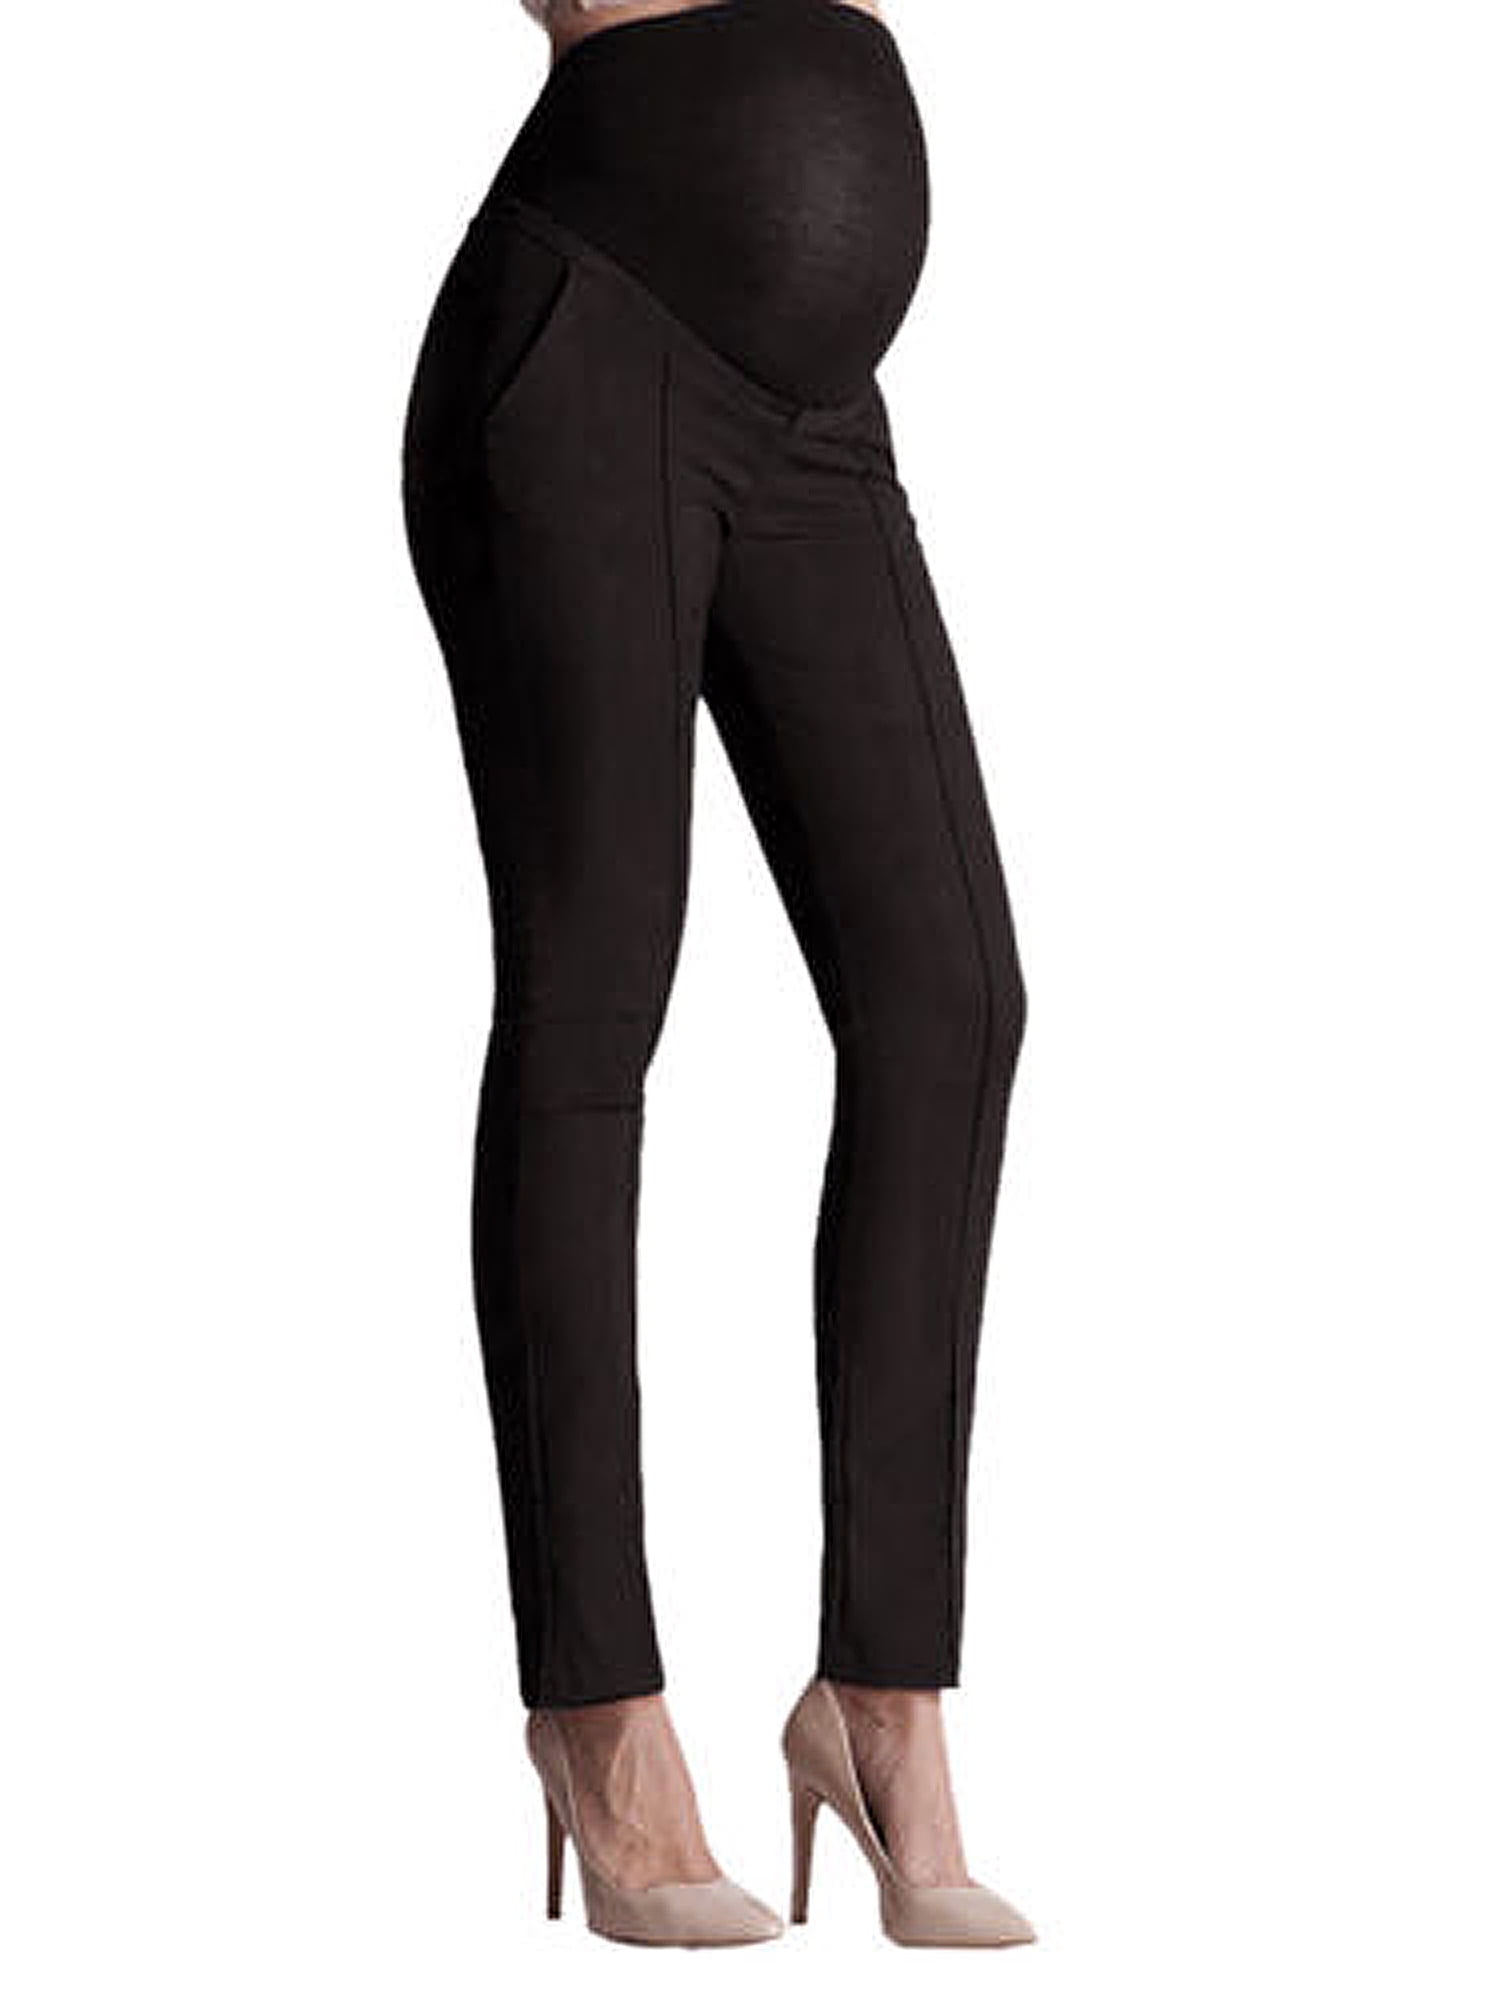 Maternity Leggings Over The Belly Activewear Gym Clothes Stretch Nursing Clothes 